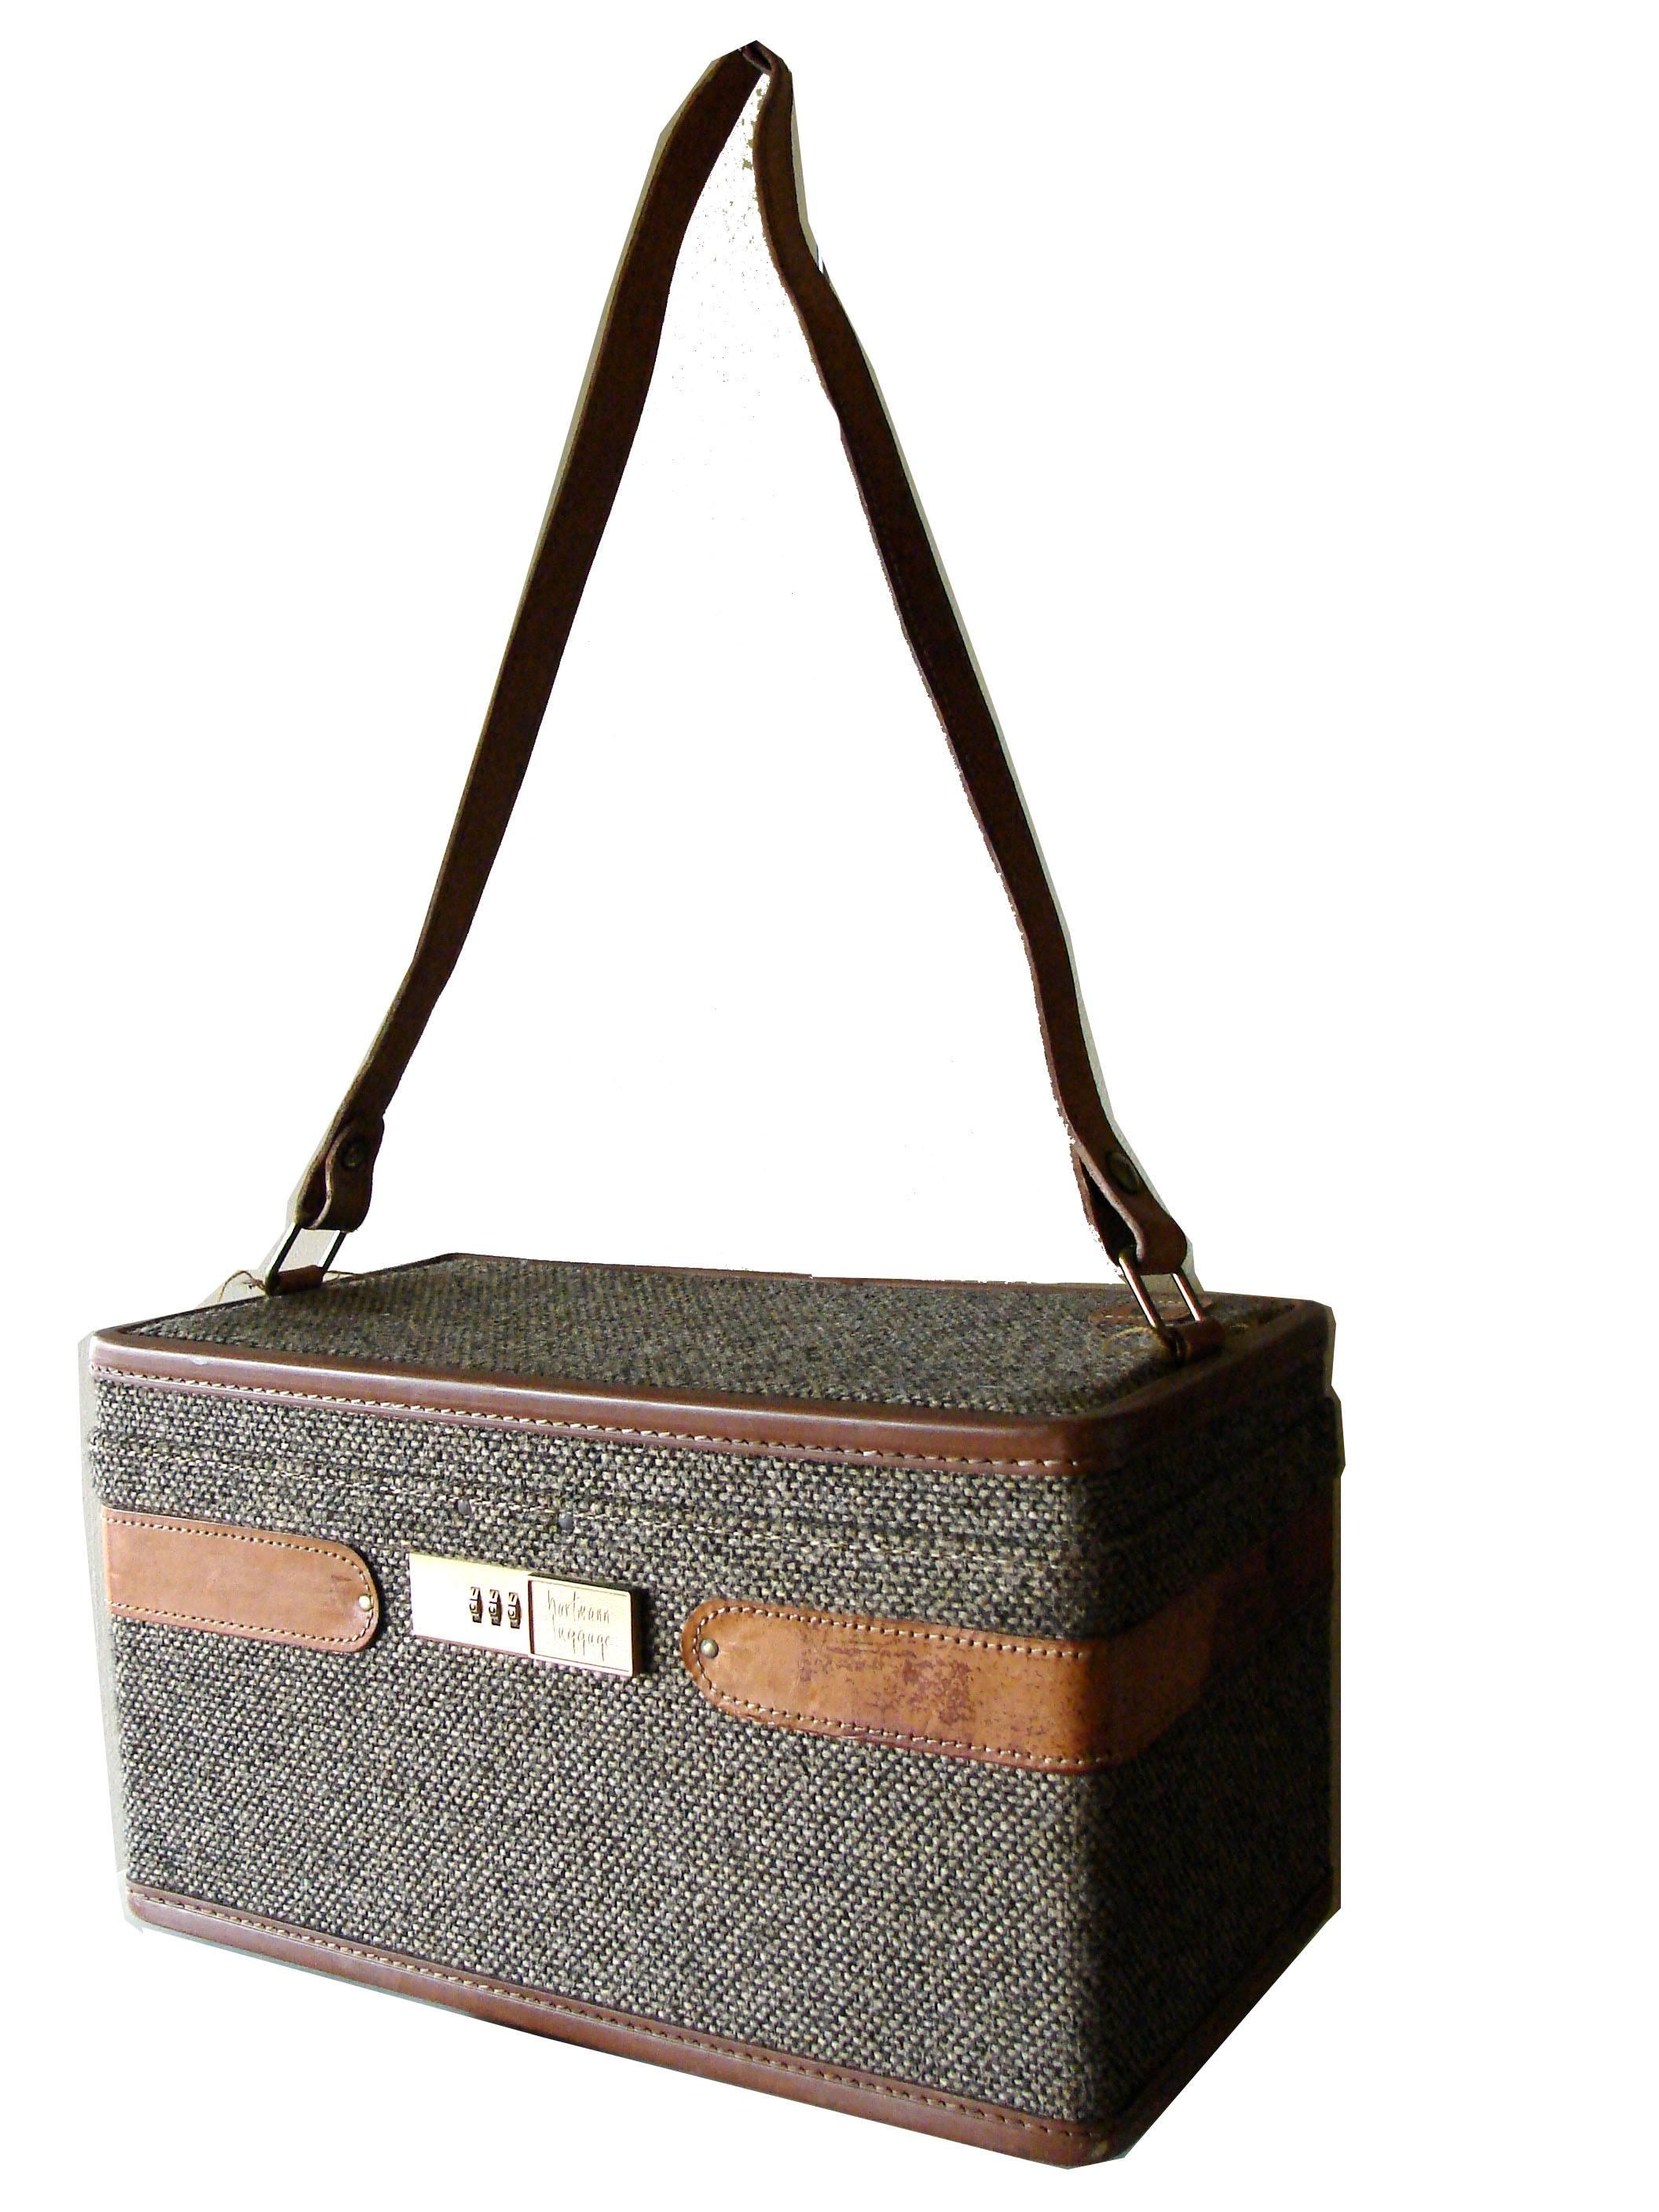 This fabulous train case or cosmetics case was made by Hartmann in the late 1970s.  Made from a nubby brown and cream tweed, it's trimmed in tan saddle leather and features a toile fabric interior lining.  In very good condition for its age, we note